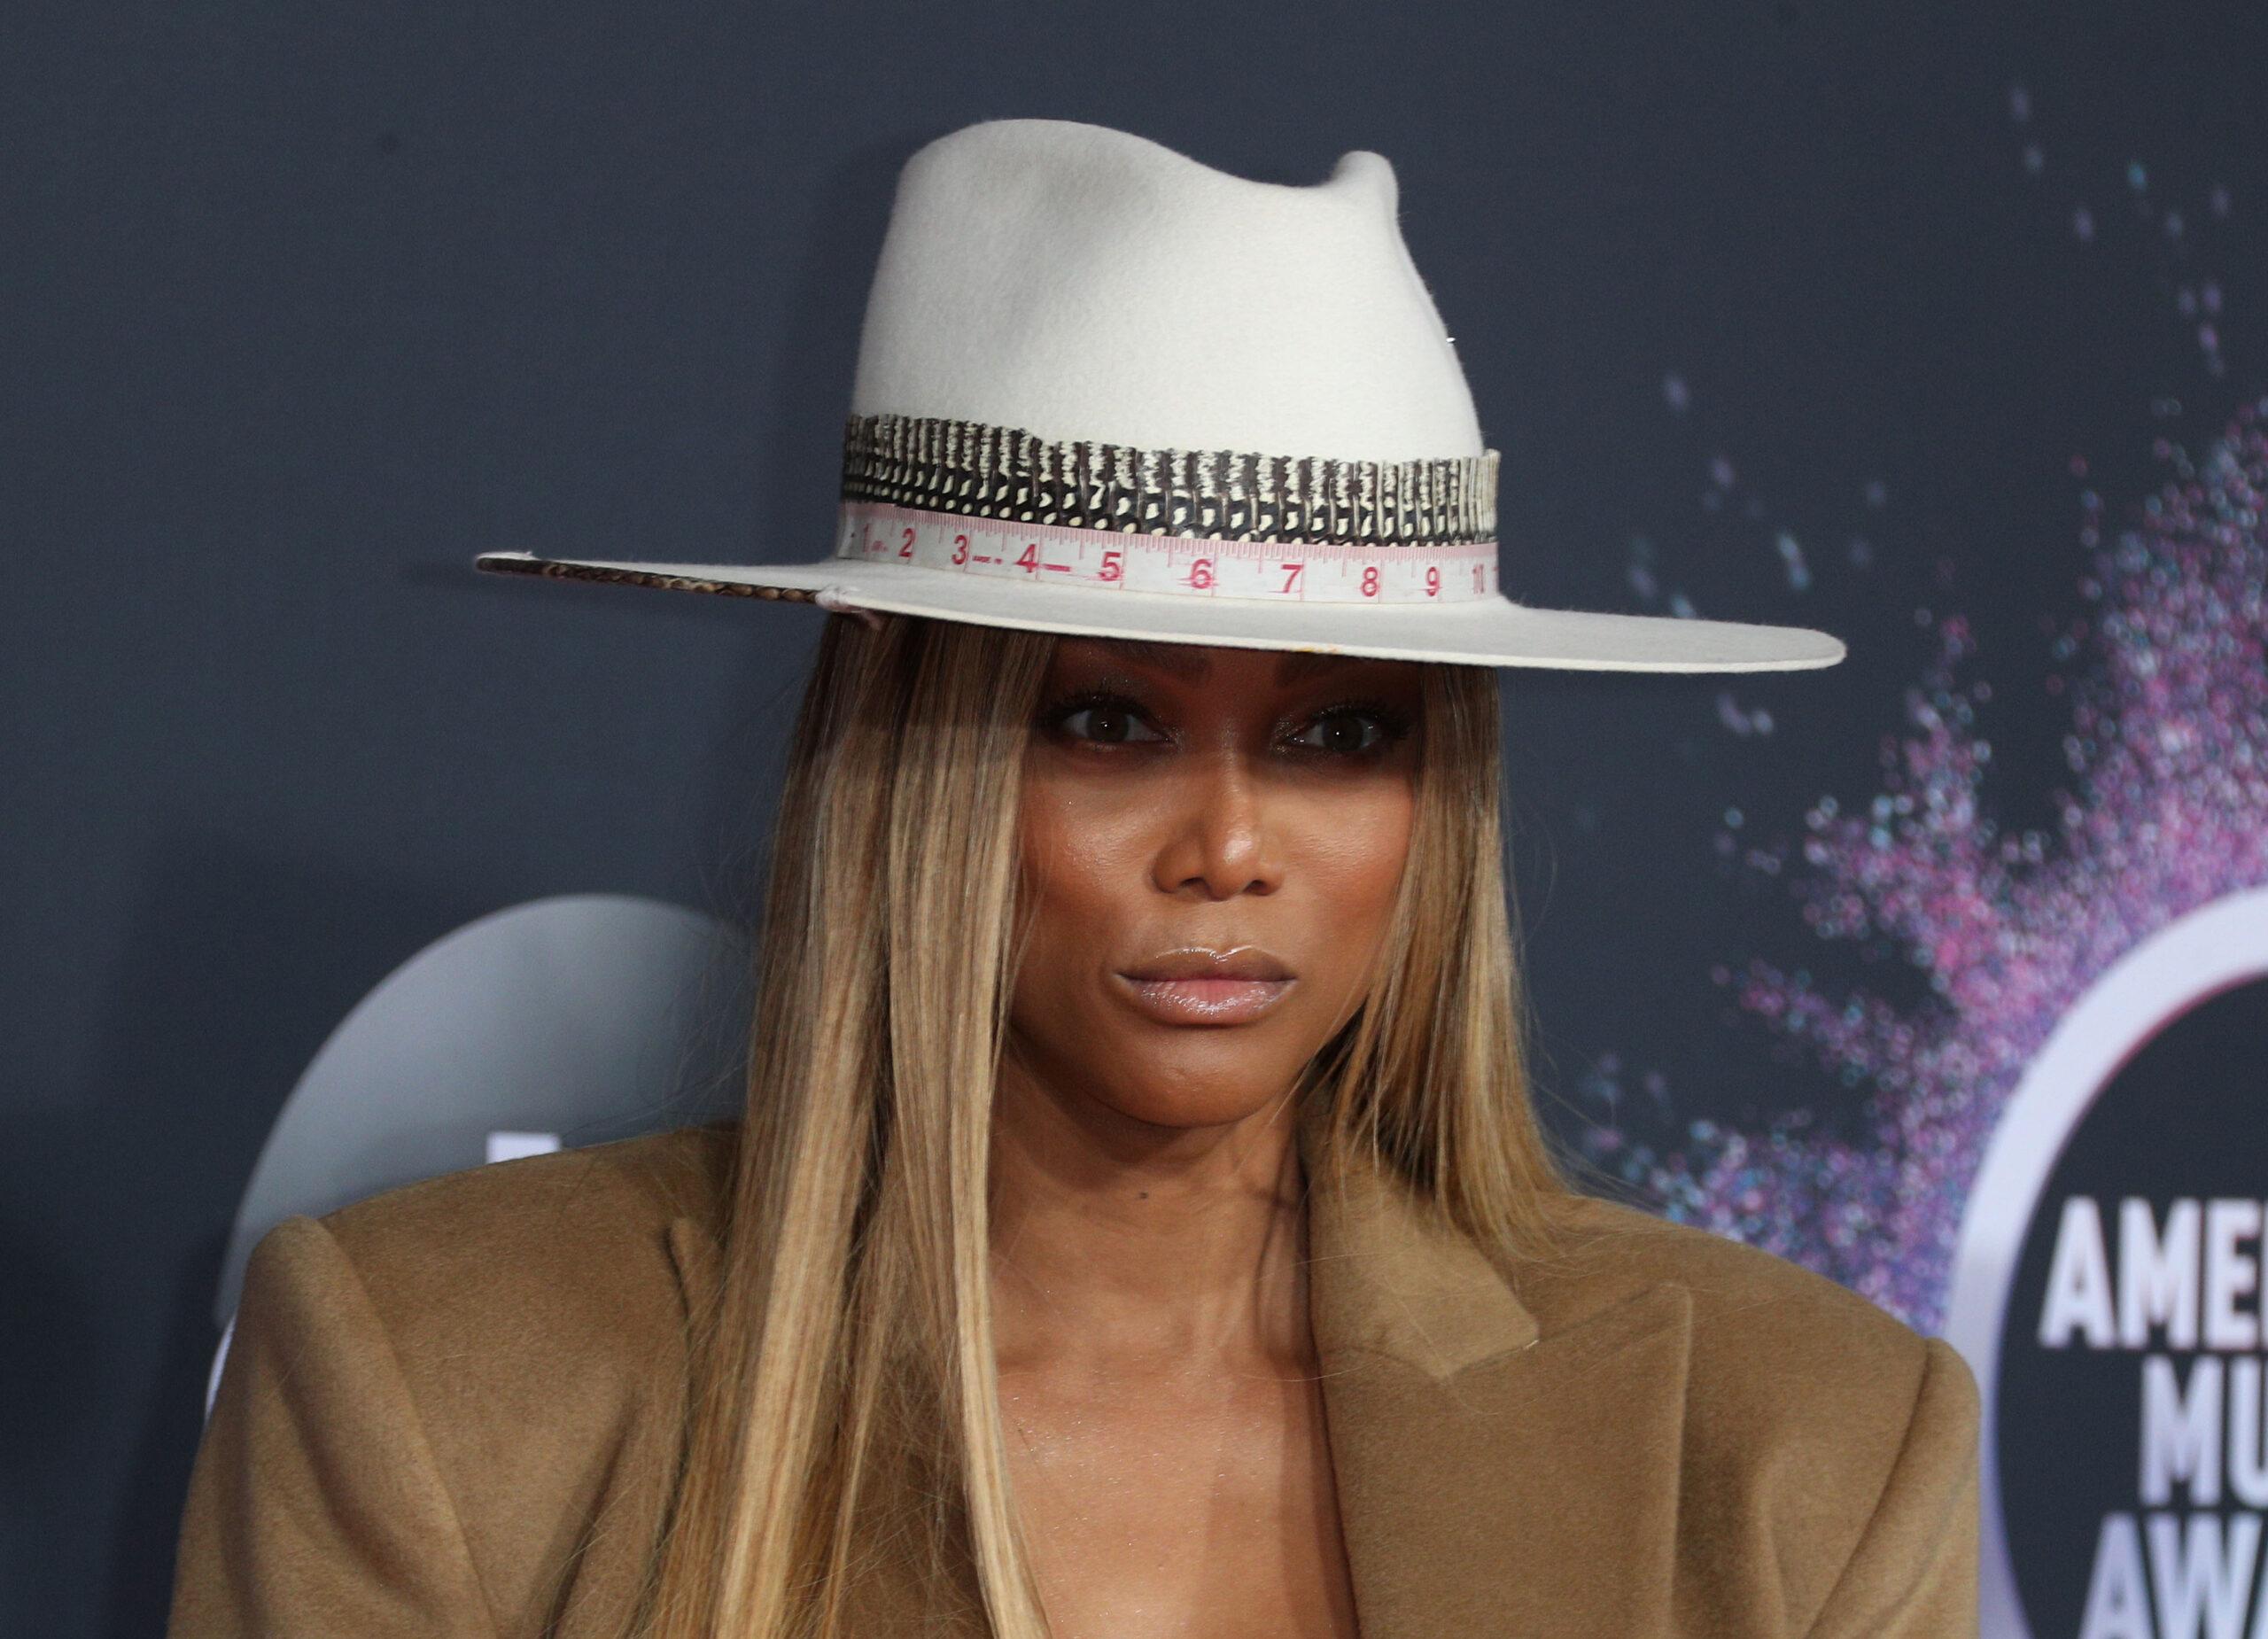 Tyra Banks Confirms She Is Quitting "Dancing With the Stars"